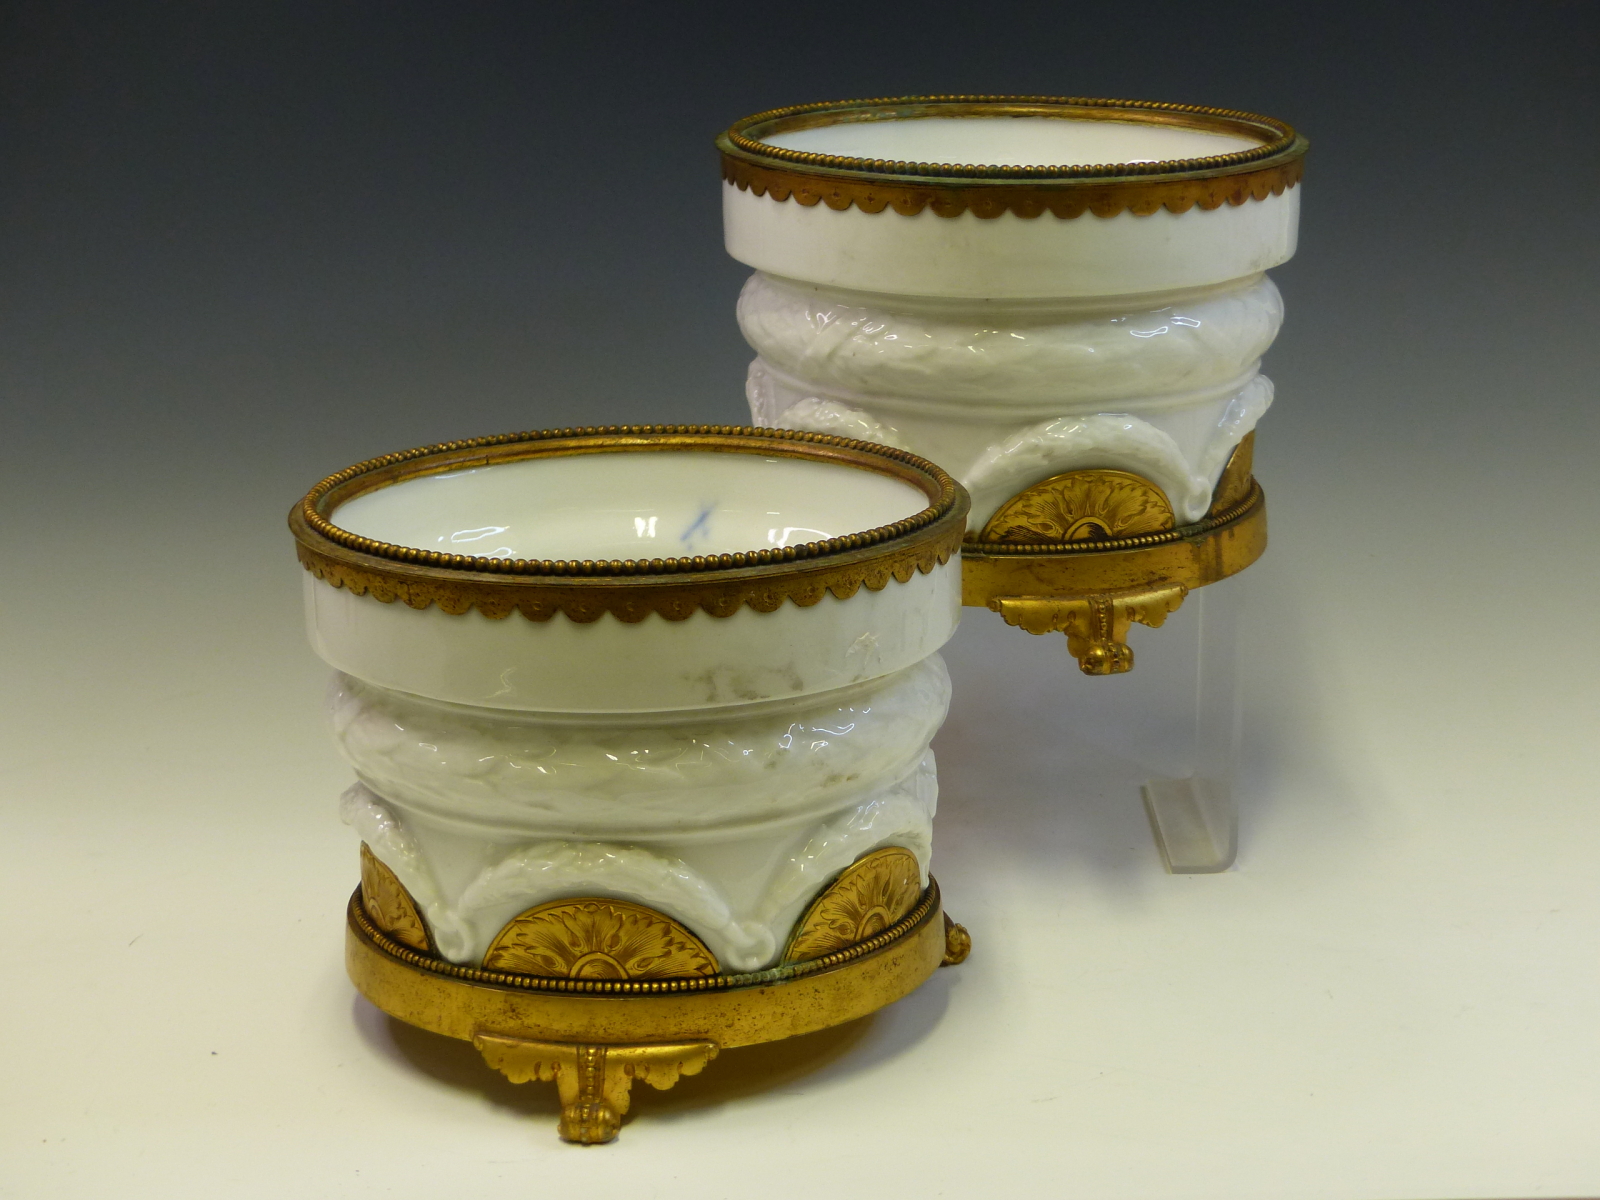 A PAIR OF GERMAN WHITE PORCELAIN PLANTERS, THE TRIPOD BASES AND BEADED RIMS IN ORMOLU. Dia. 19 x H